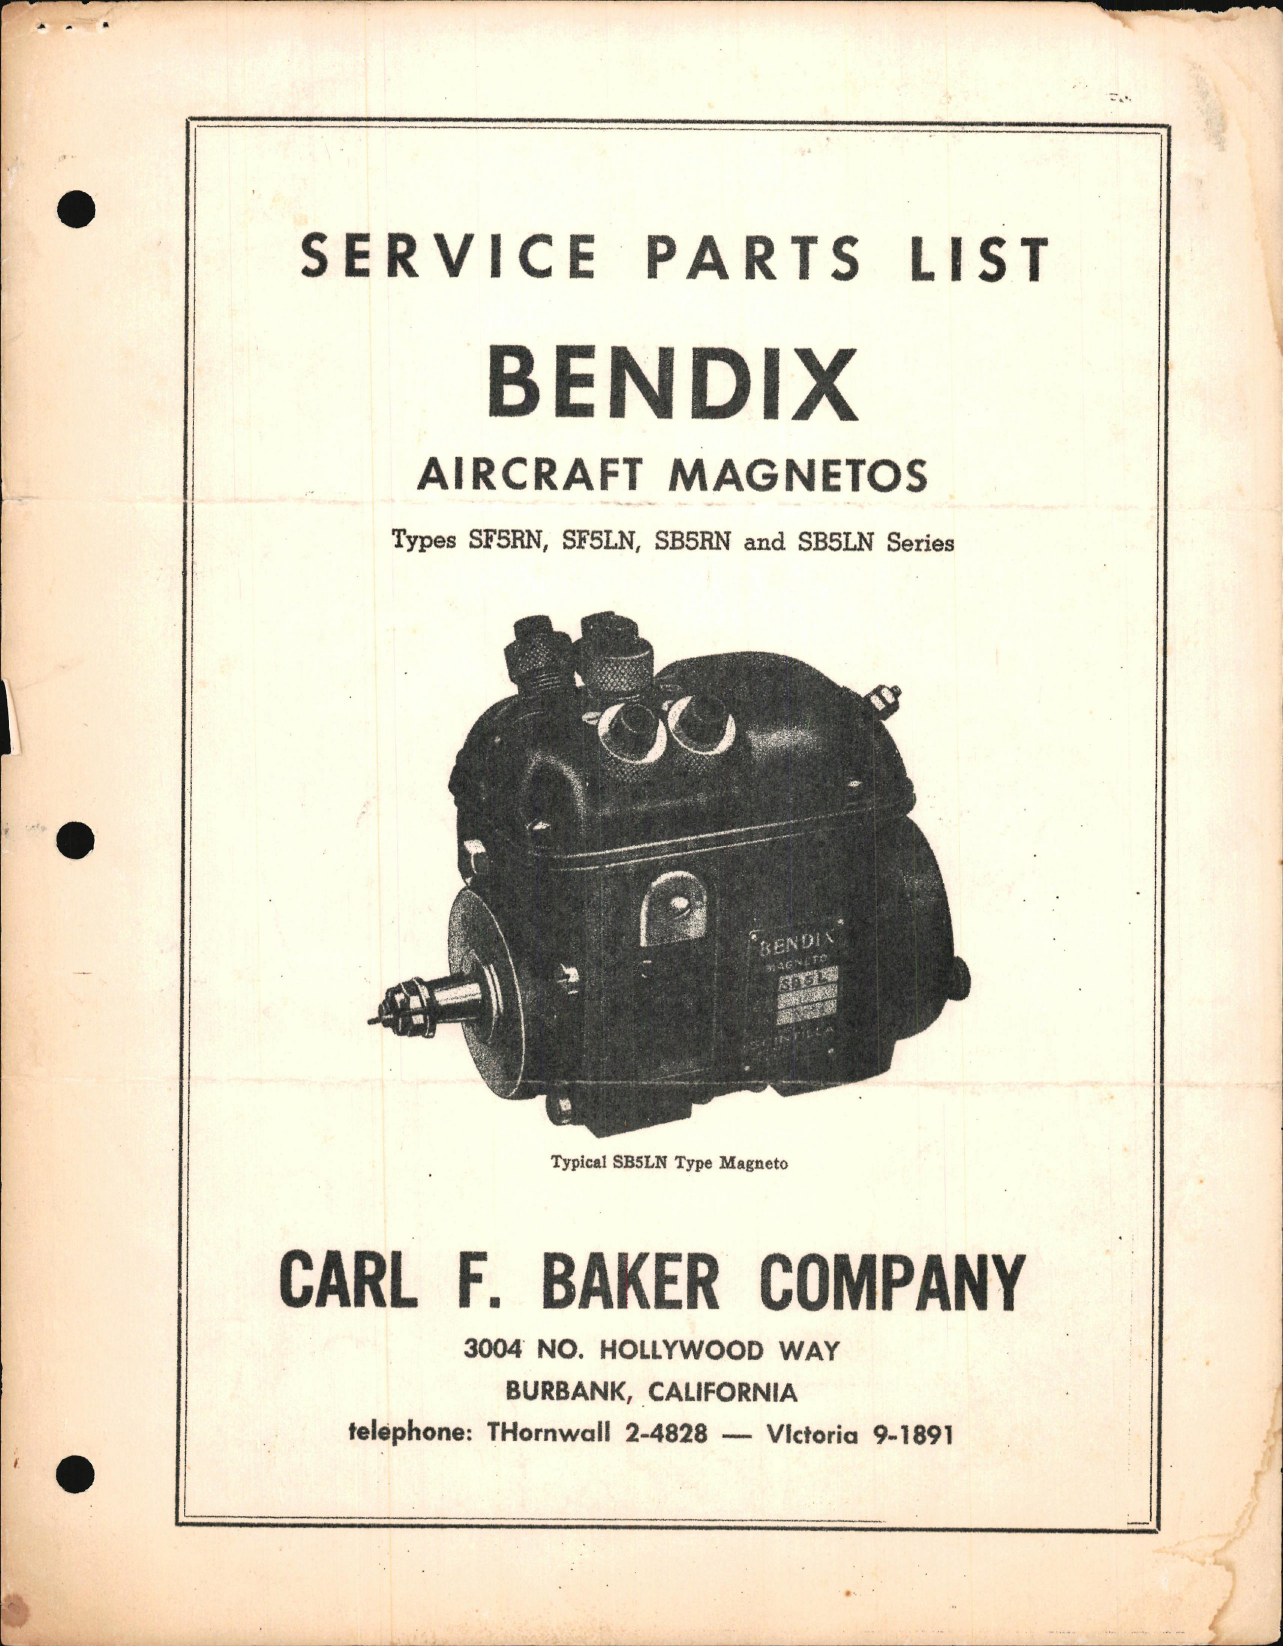 Sample page 1 from AirCorps Library document: Service Parts List for Bendix Magnetos SF5RN, SF5LN, SB5RN, and SB5LN